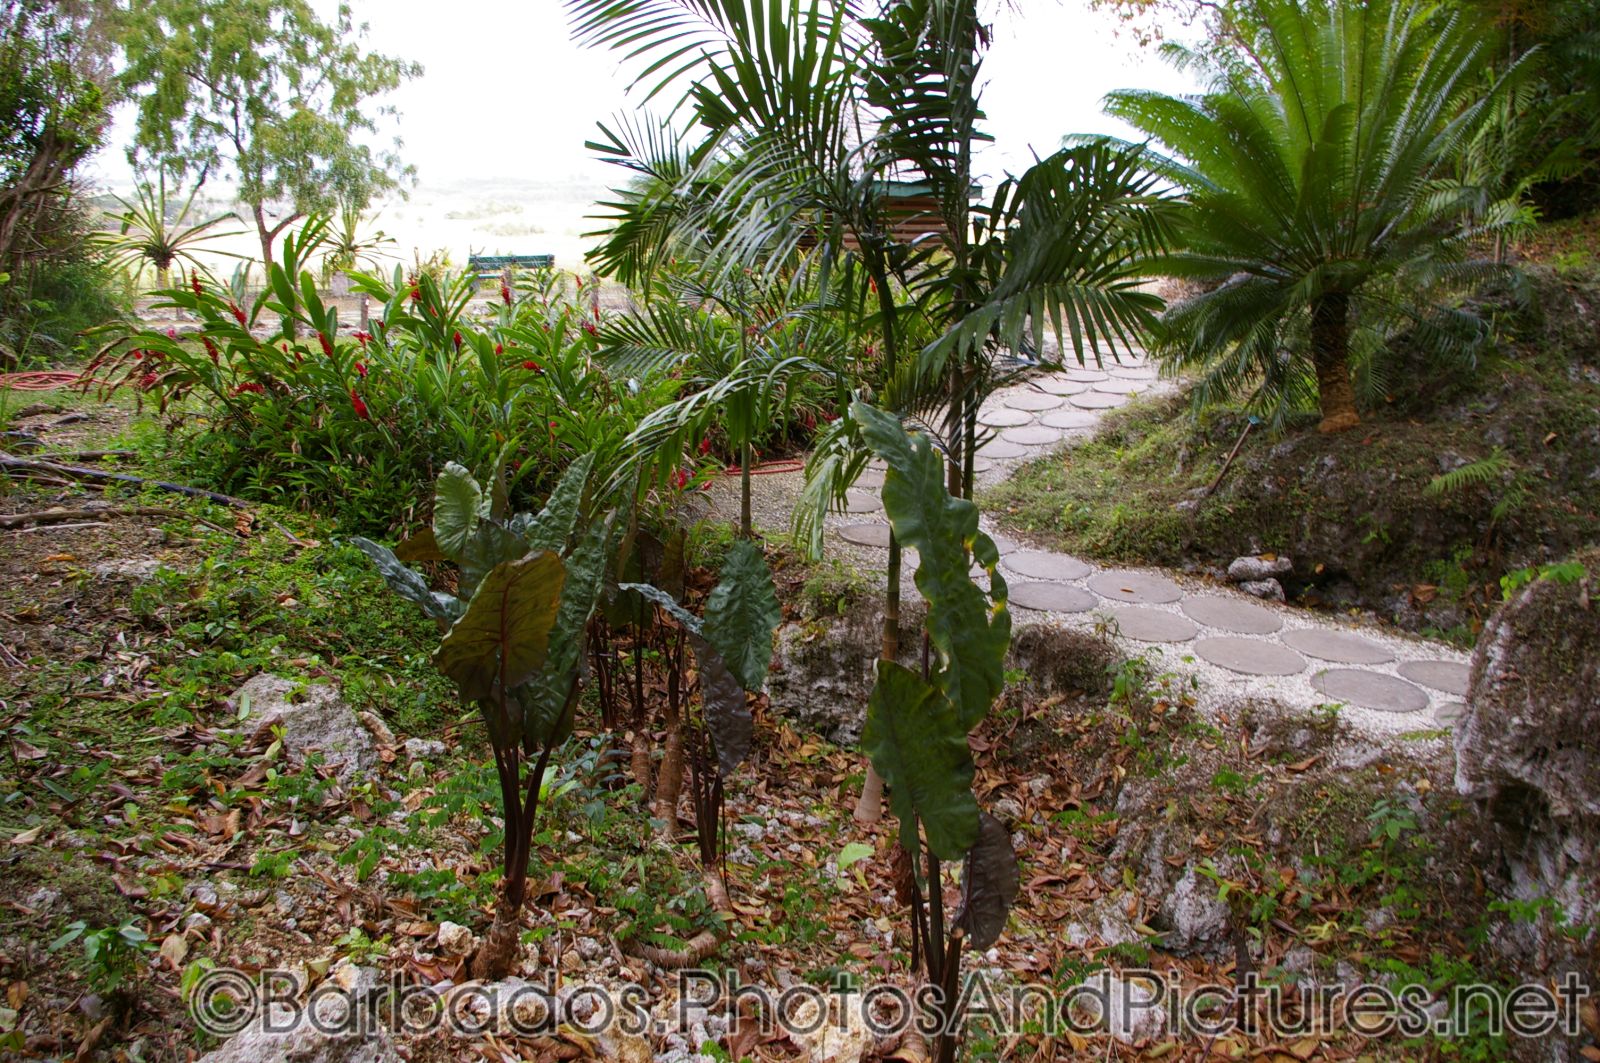 Tropical plants at Orchid World in Barbados.jpg
